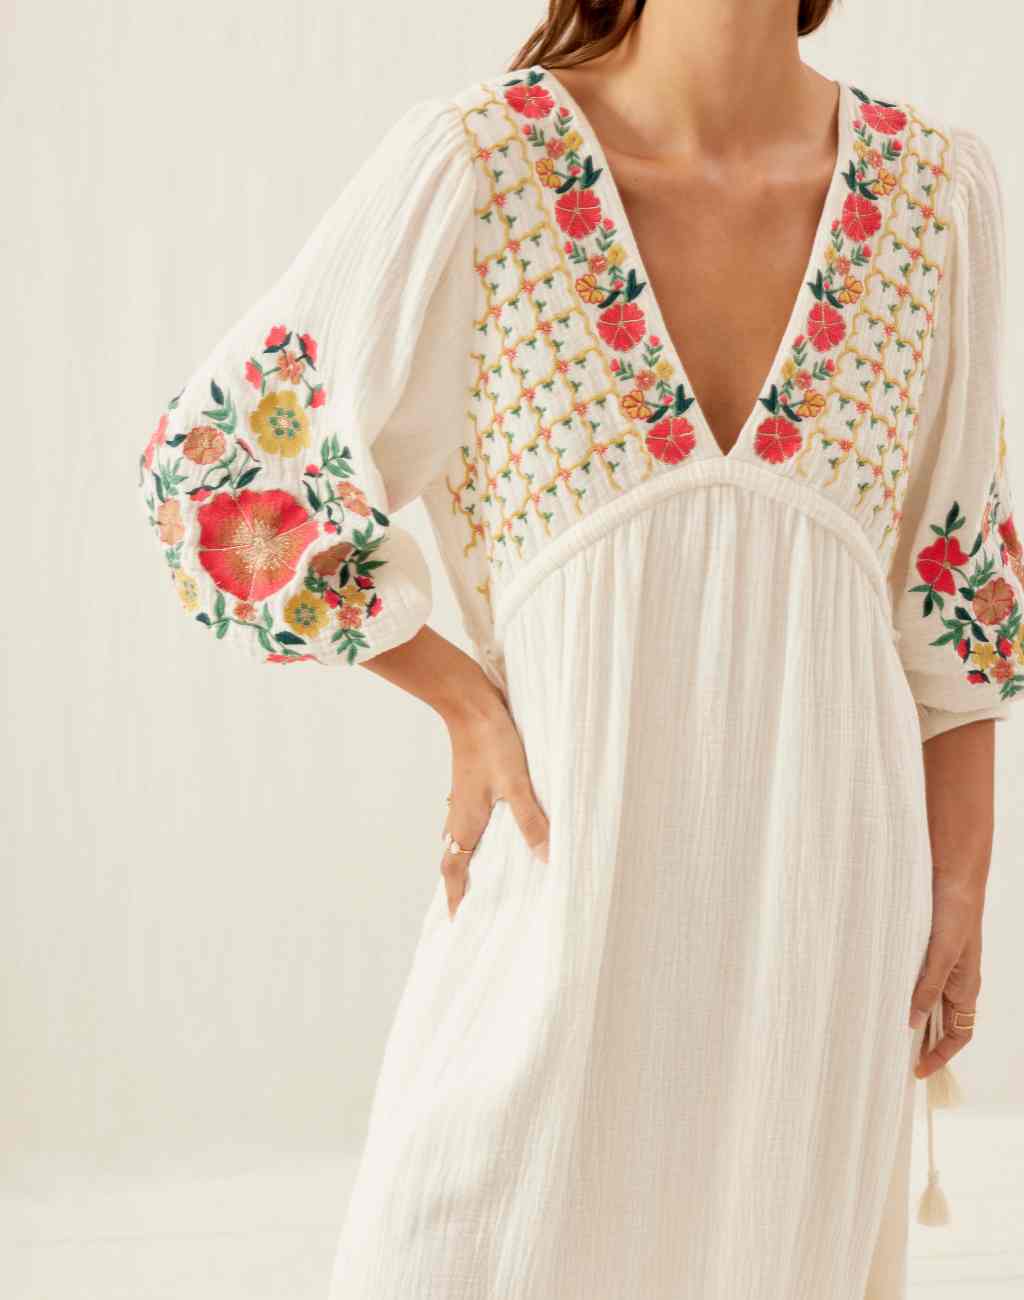 Bali Maxi Dress with Colorful Embroidery